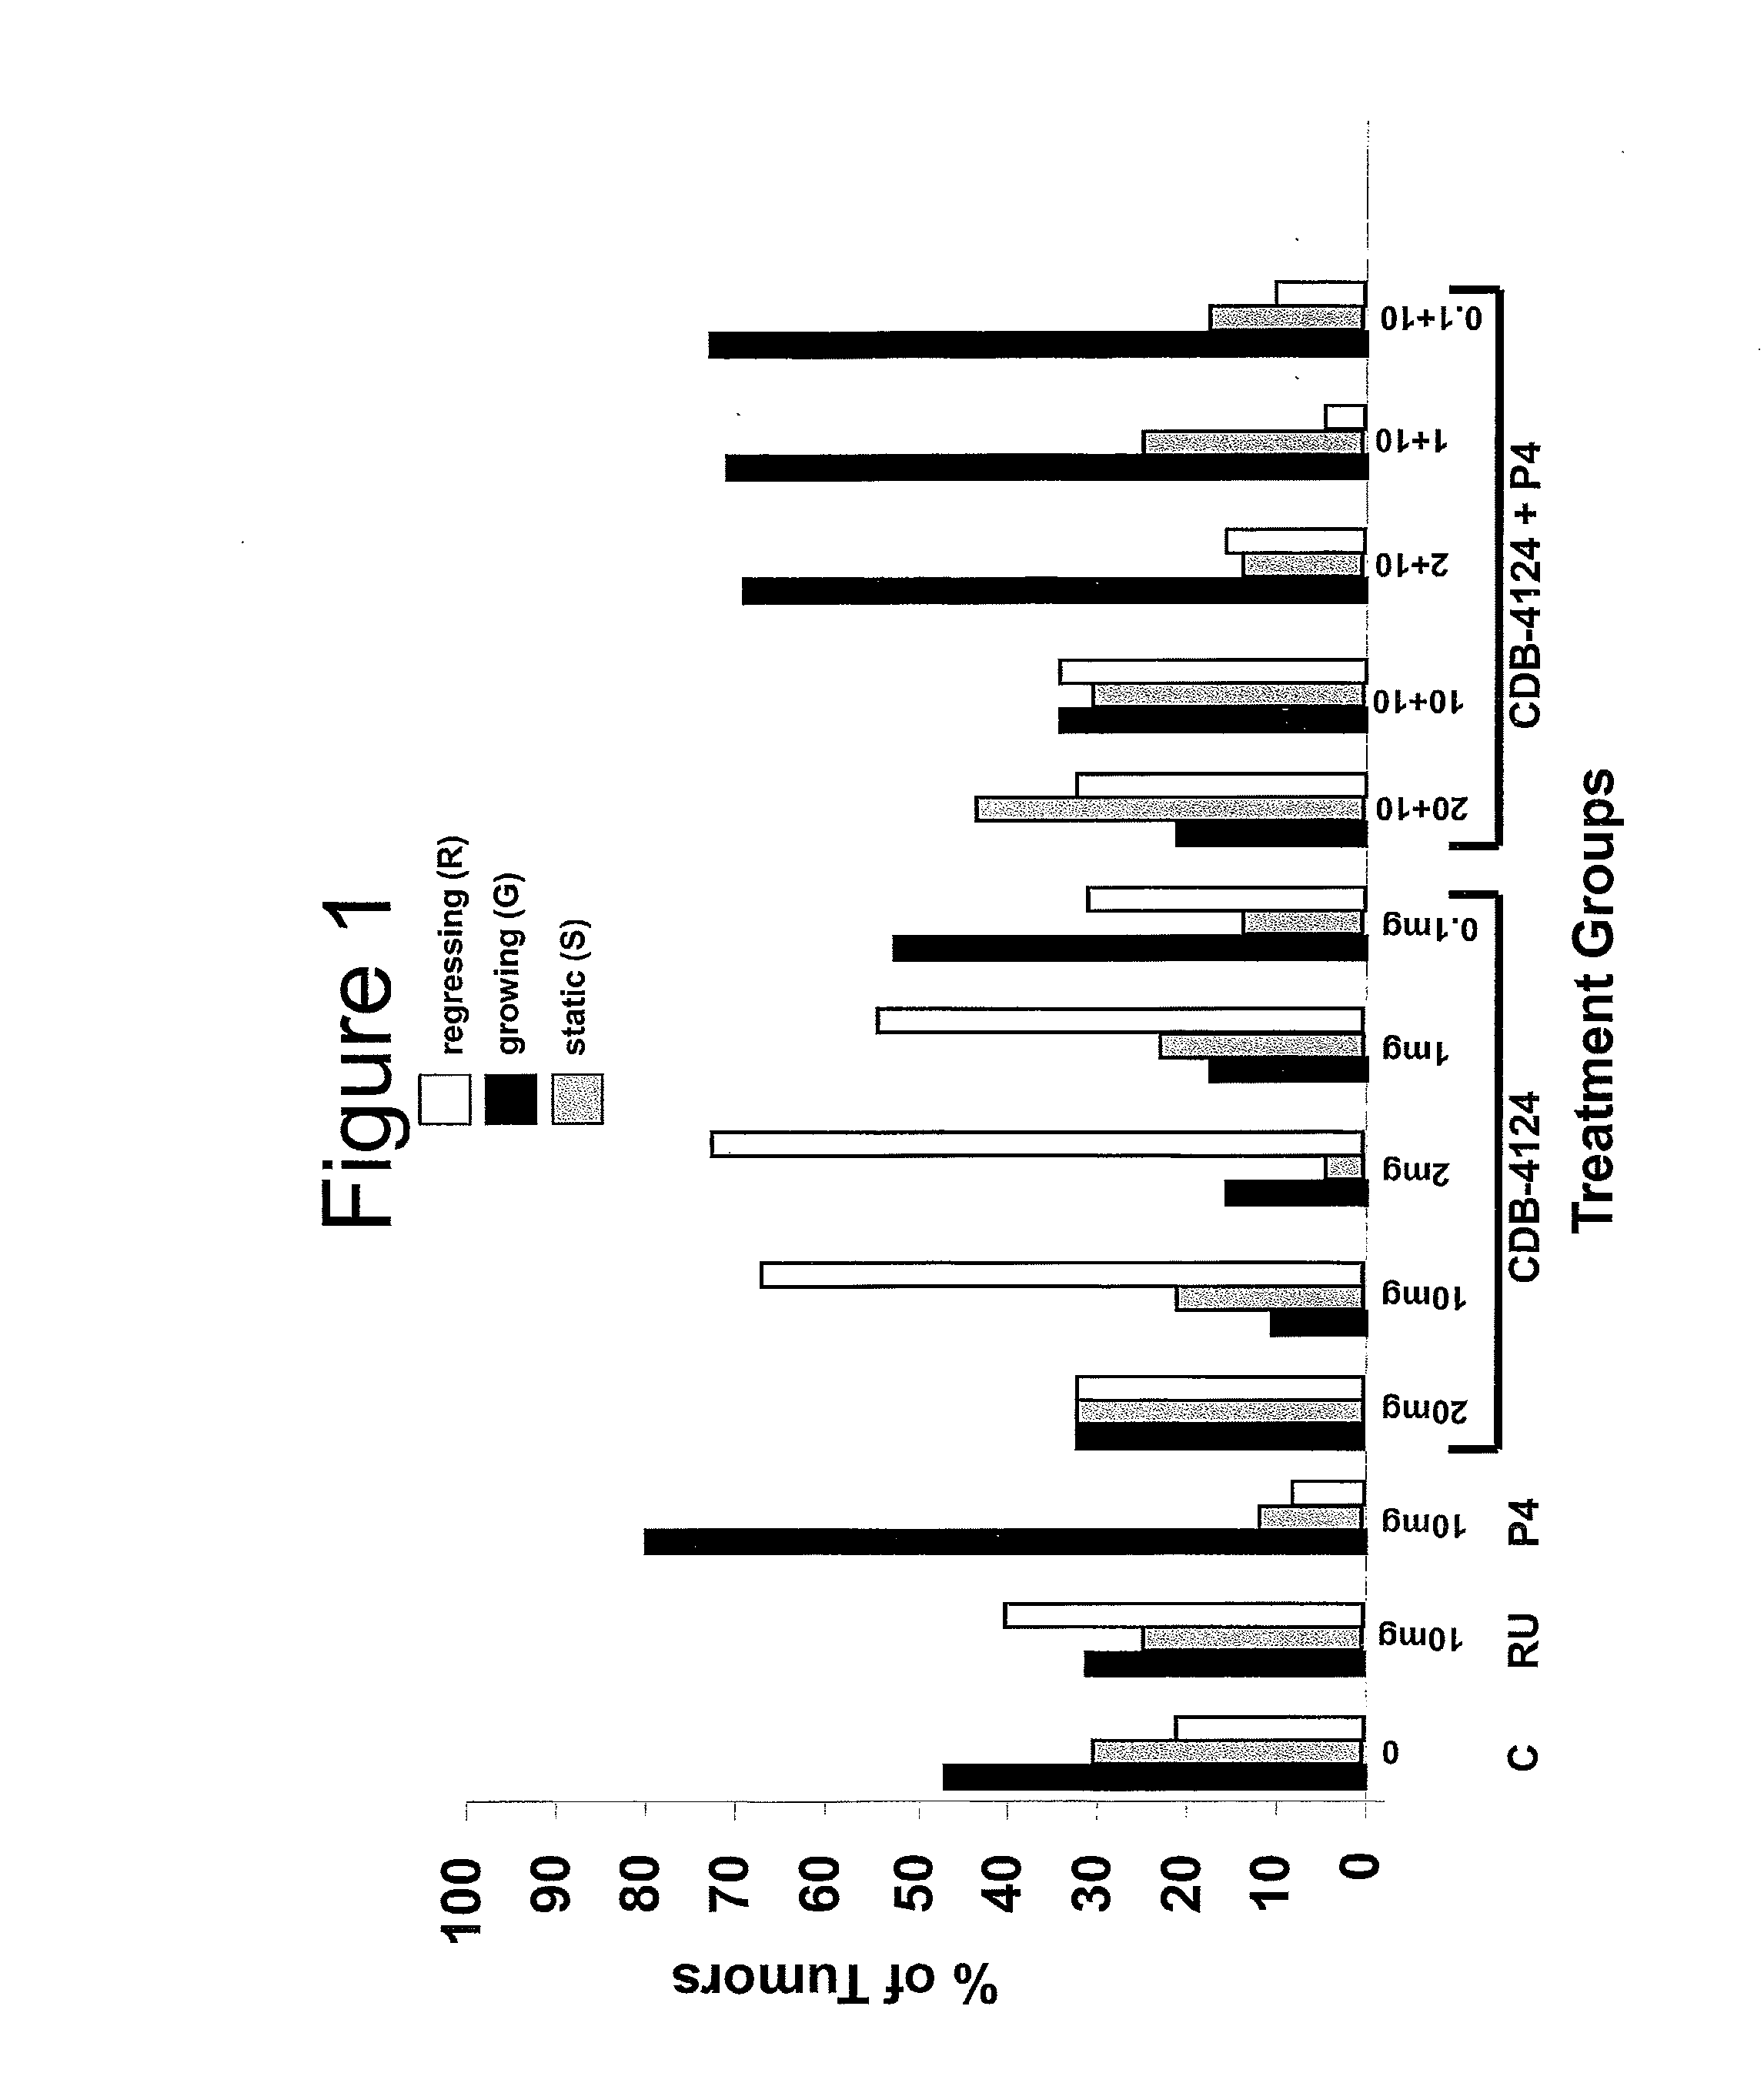 Progesterone Antagonists such as CDB-4124 in the Treatment of Breast Cancer